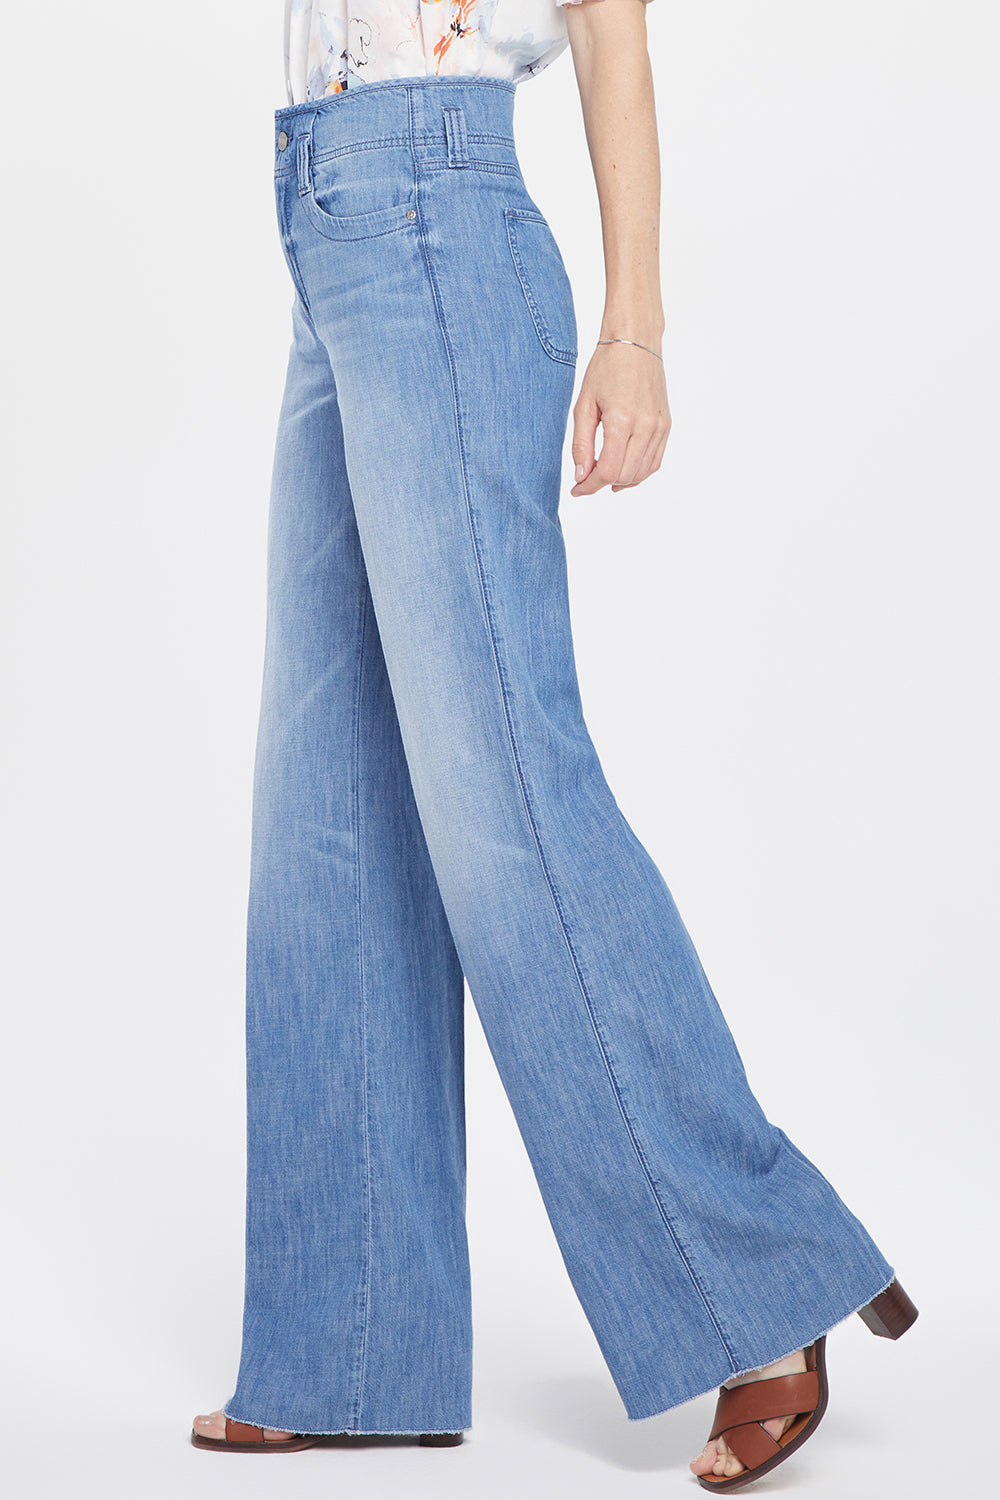 Teresa Wide Leg Jeans In Tall With 36 Inseam, High Rise And Raw Hems -  Everly Blue